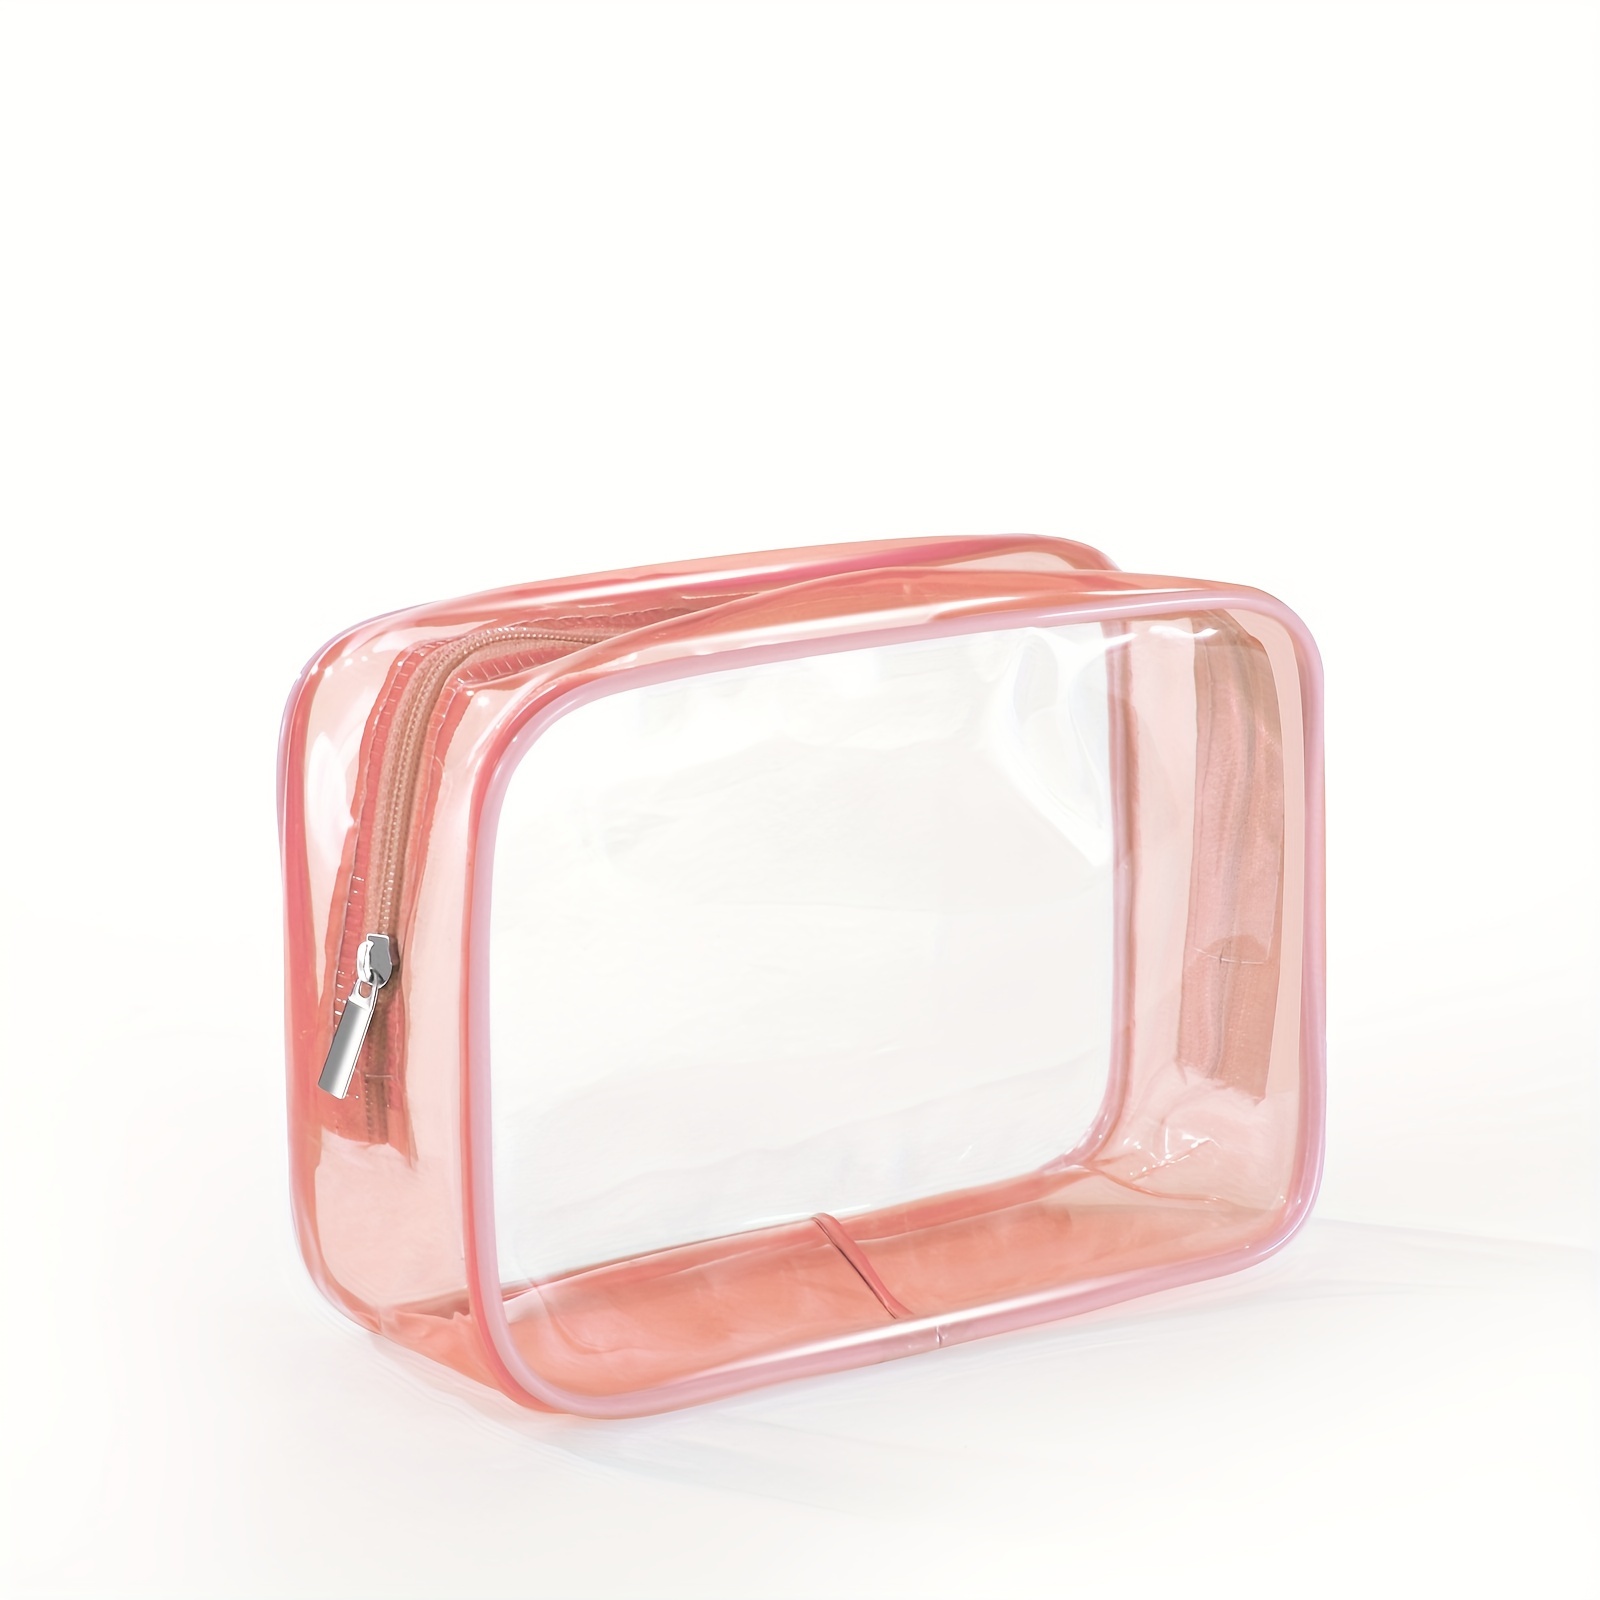 Clear Travel Pouches